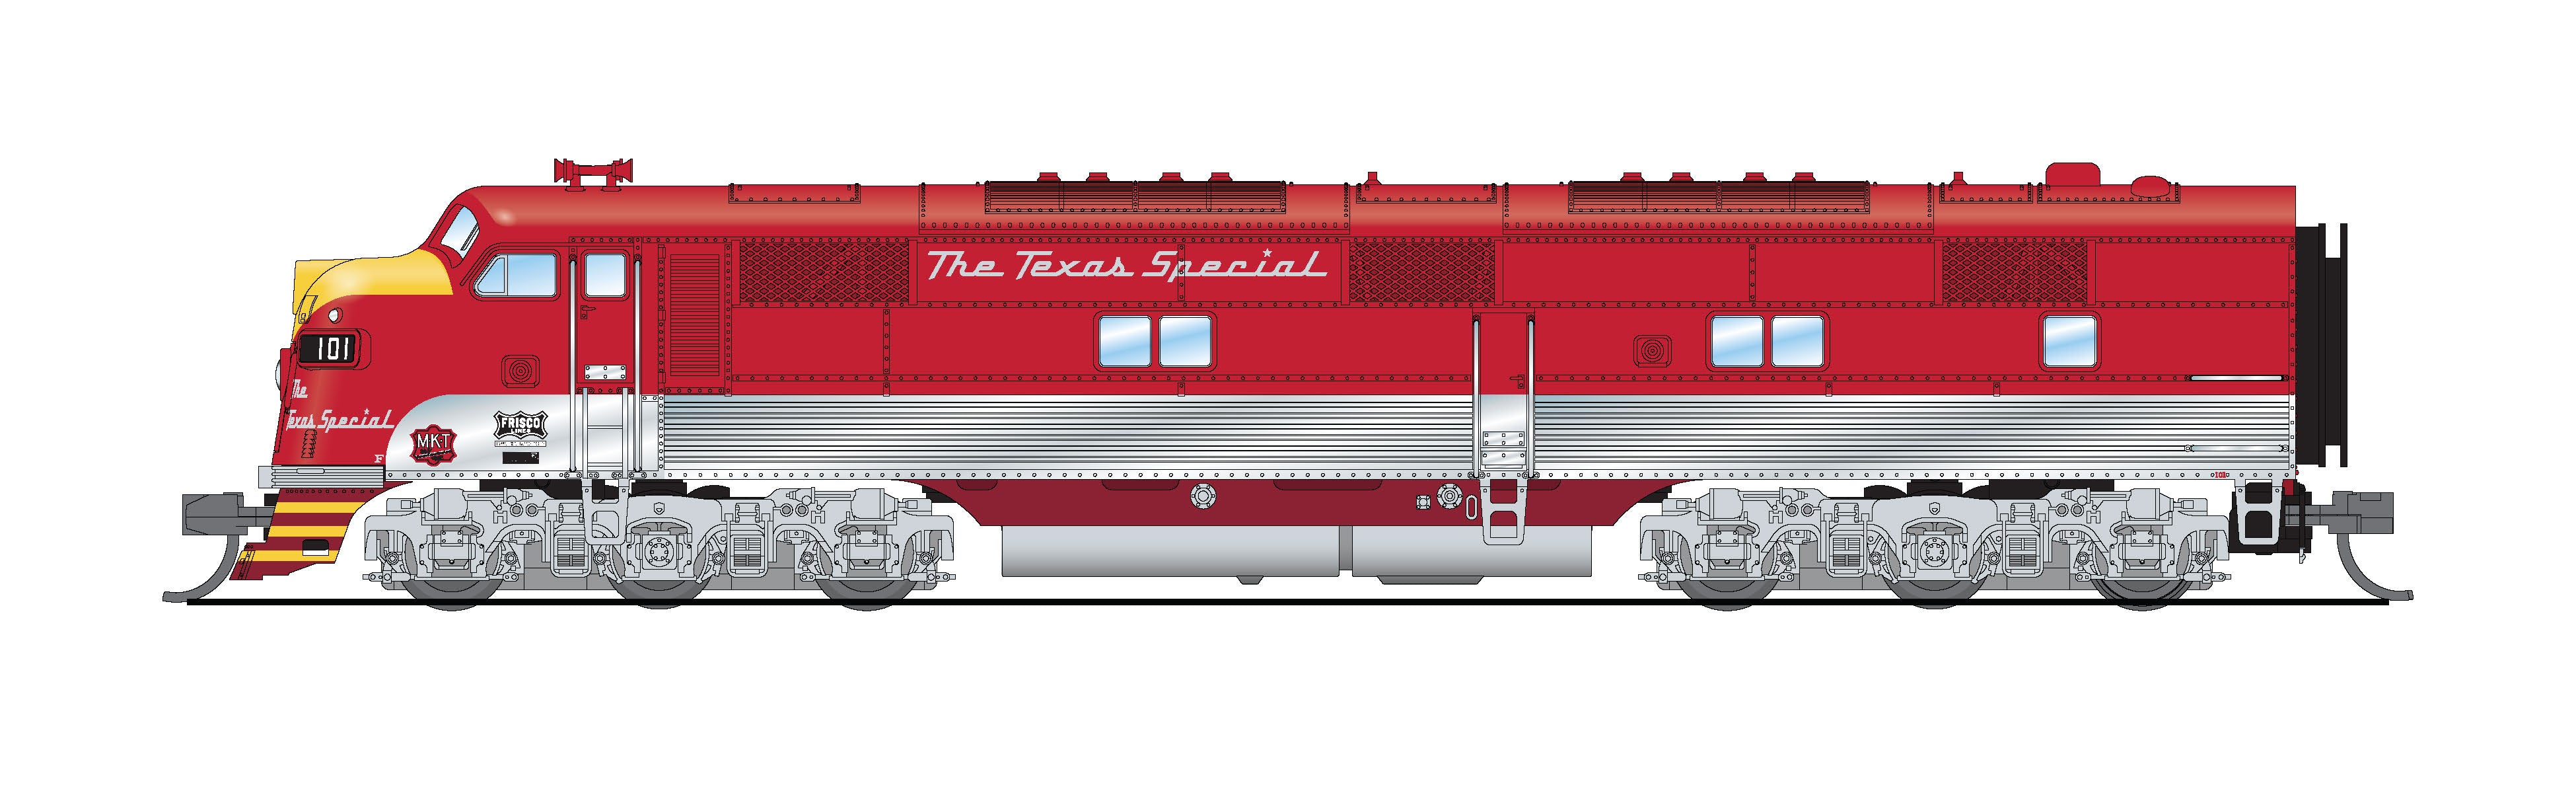 8783 EMD E7A, MKT #101-A, Texas Special, Paragon4 Sound/DC/DCC, N (Lowell Smith Exclusive)